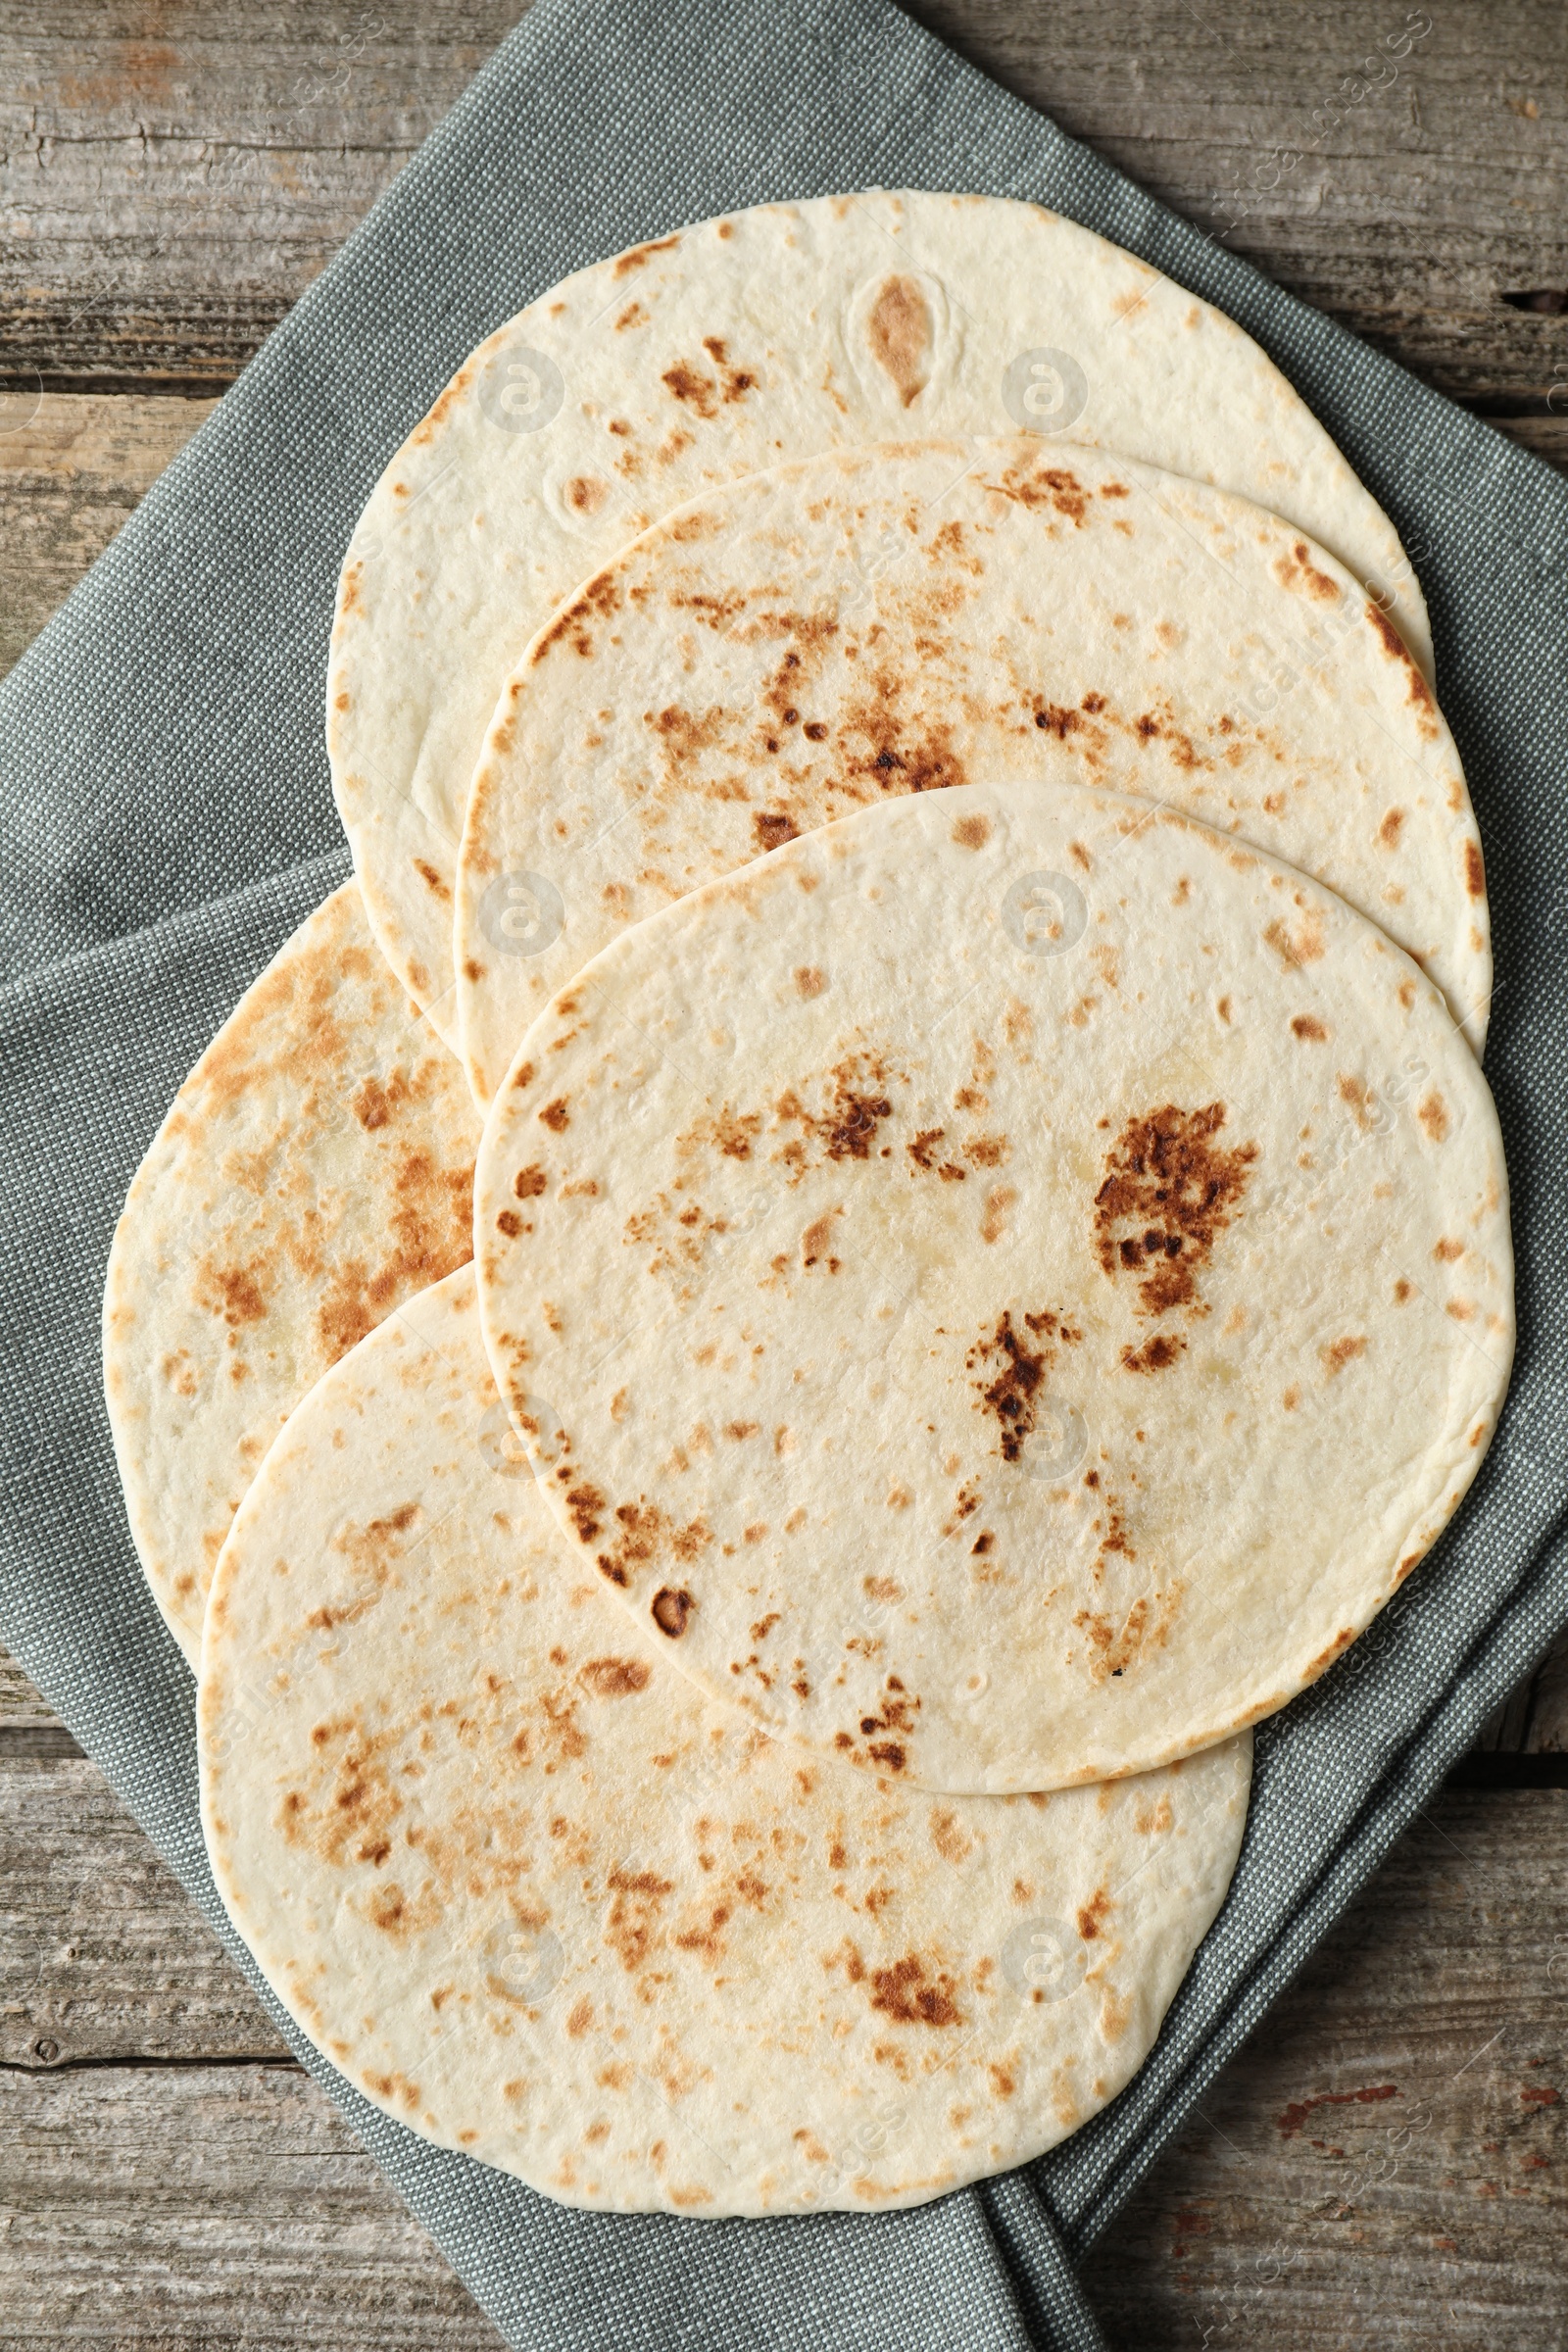 Photo of Tasty homemade tortillas on wooden table, top view